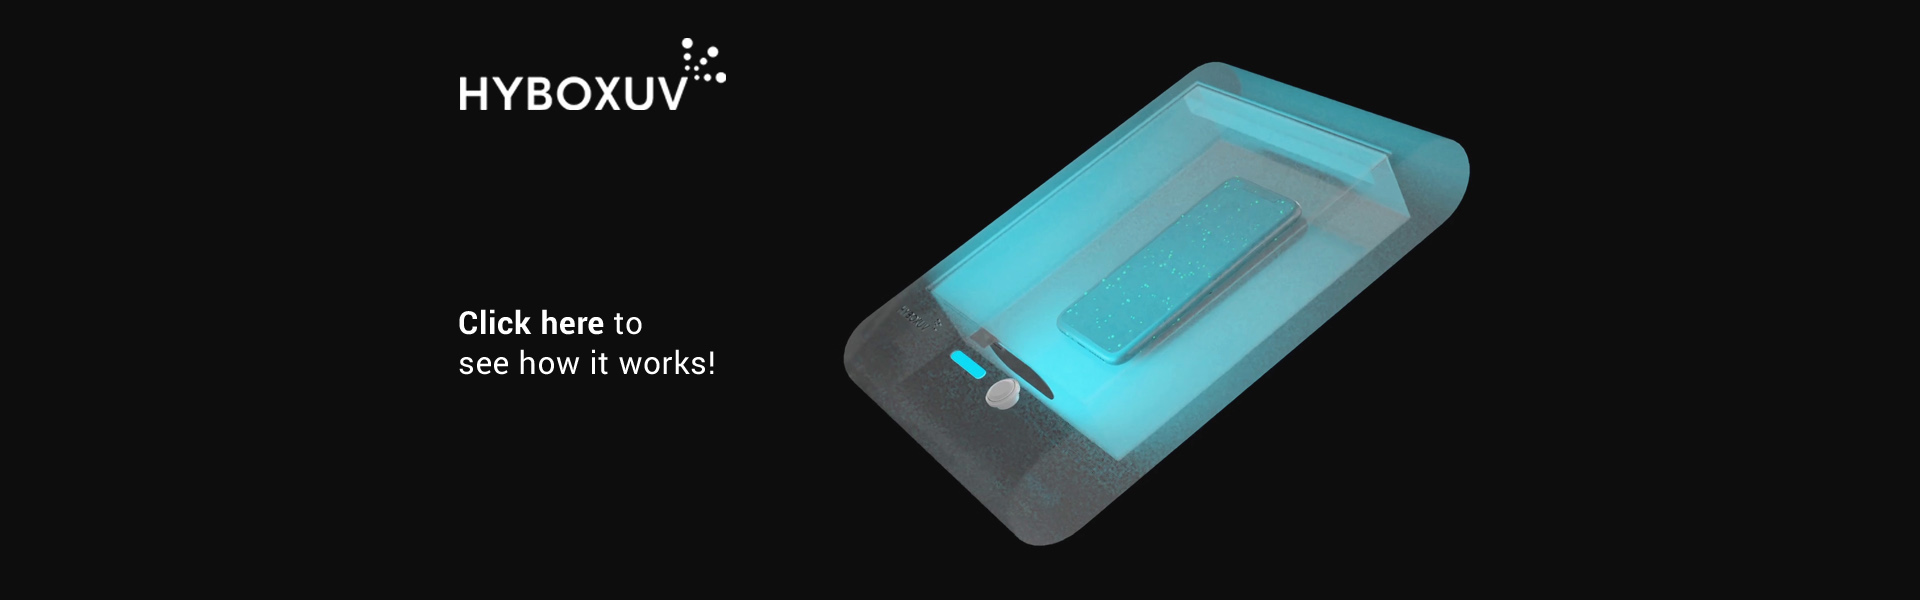 HYBOXUV - Disinfection of objects with UV-C Light video thumbnail